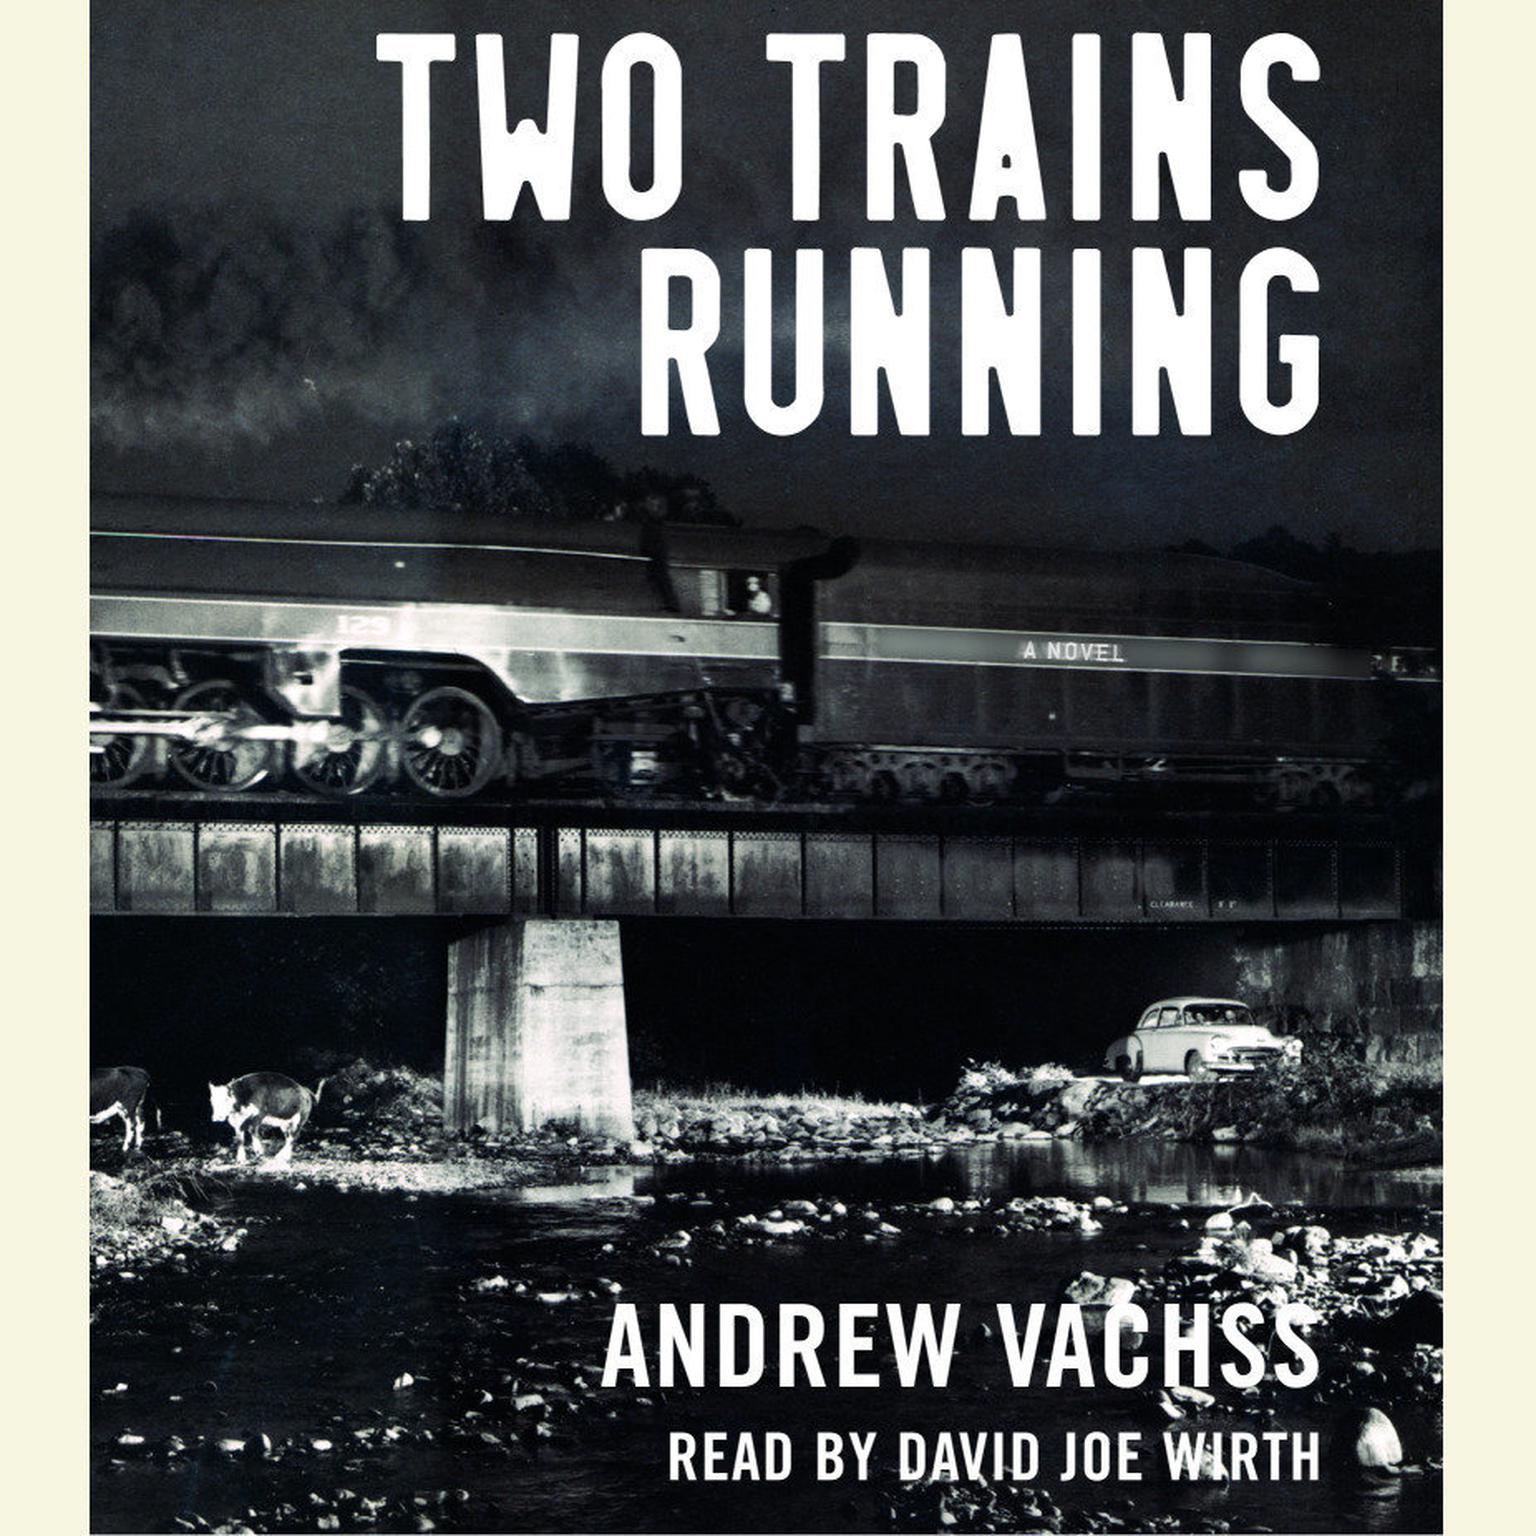 Two Trains Running (Abridged): A Novel Audiobook, by Andrew Vachss